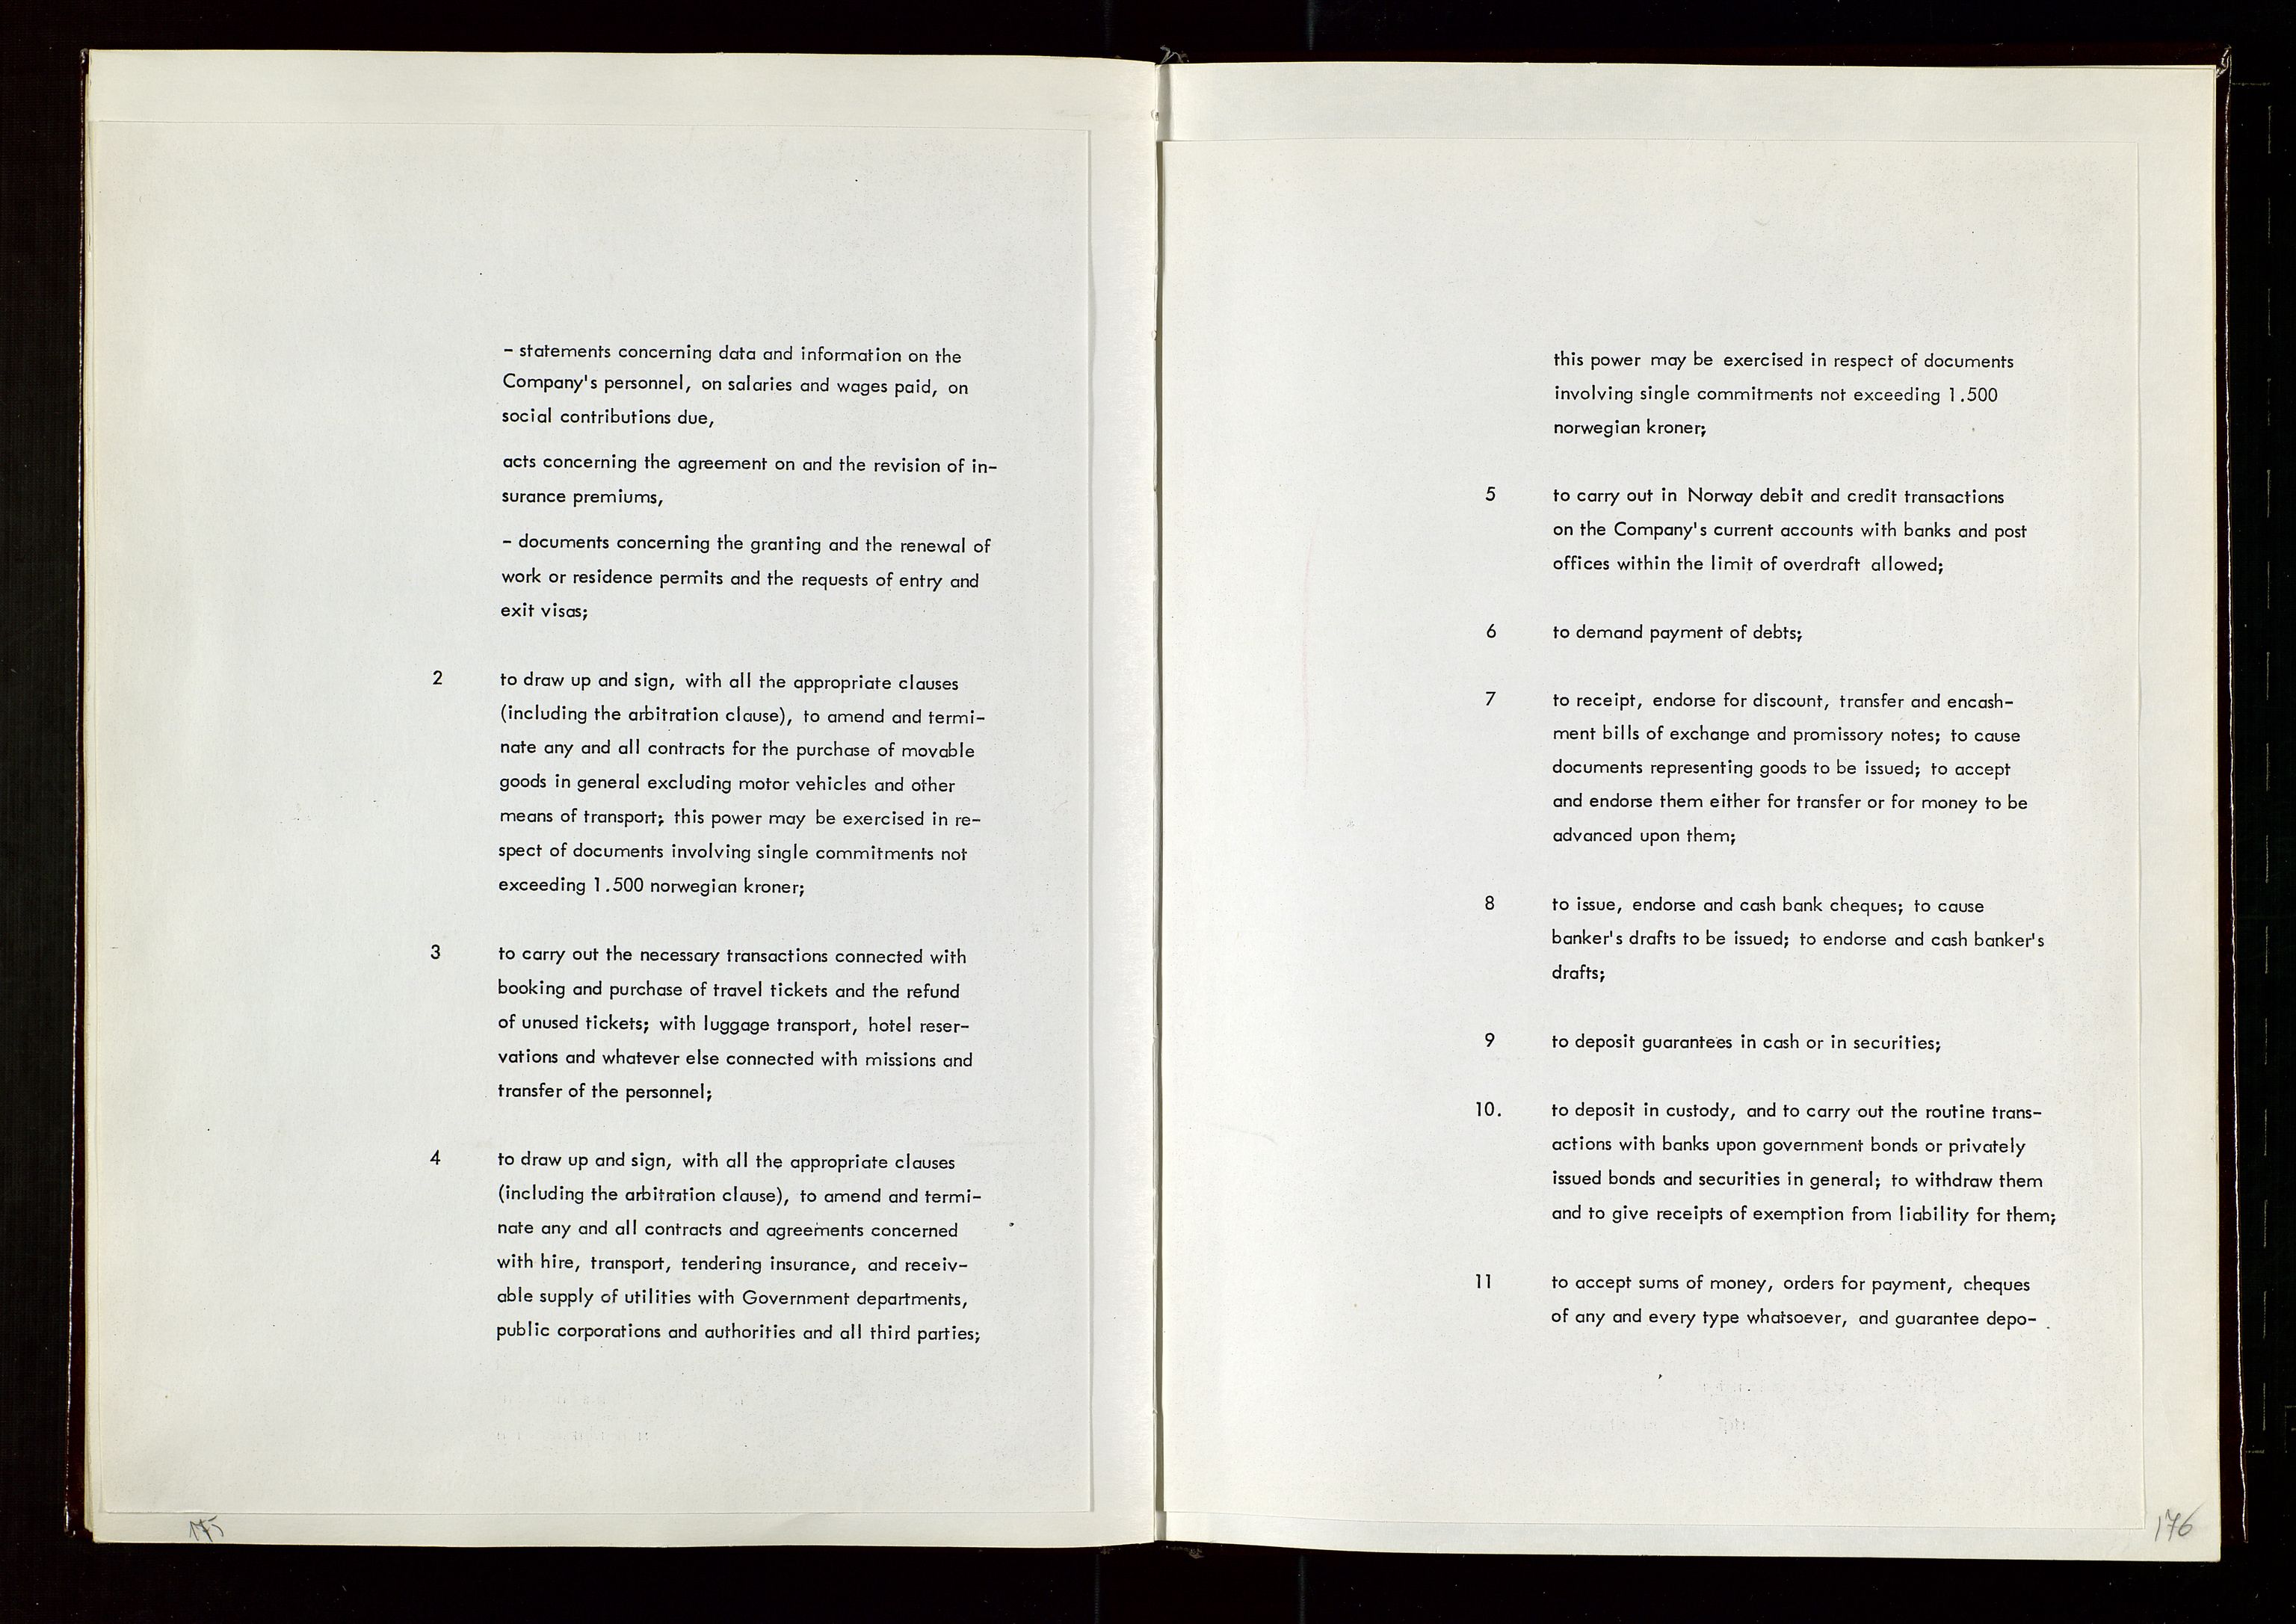 Pa 1583 - Norsk Agip AS, SAST/A-102138/A/Aa/L0002: General assembly and Board of Directors meeting minutes, 1972-1979, s. 175-176